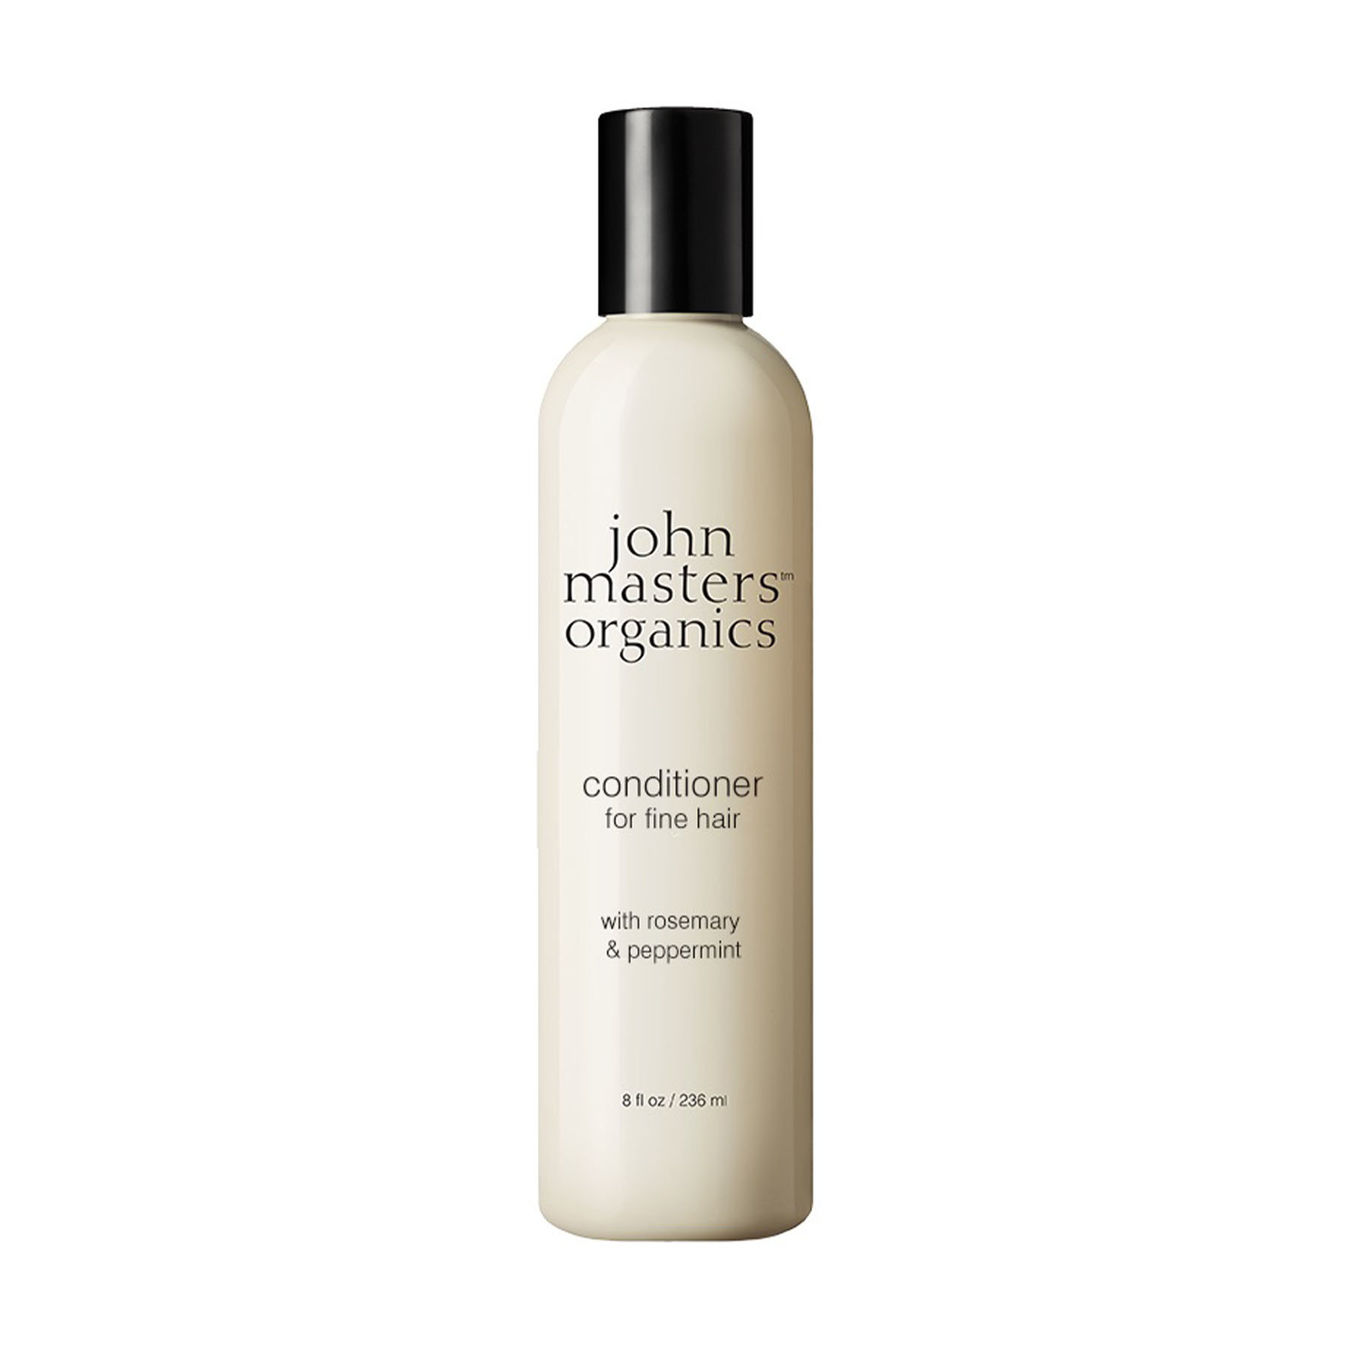 john masters organics with rosemary & peppermint conditioner for fine hair